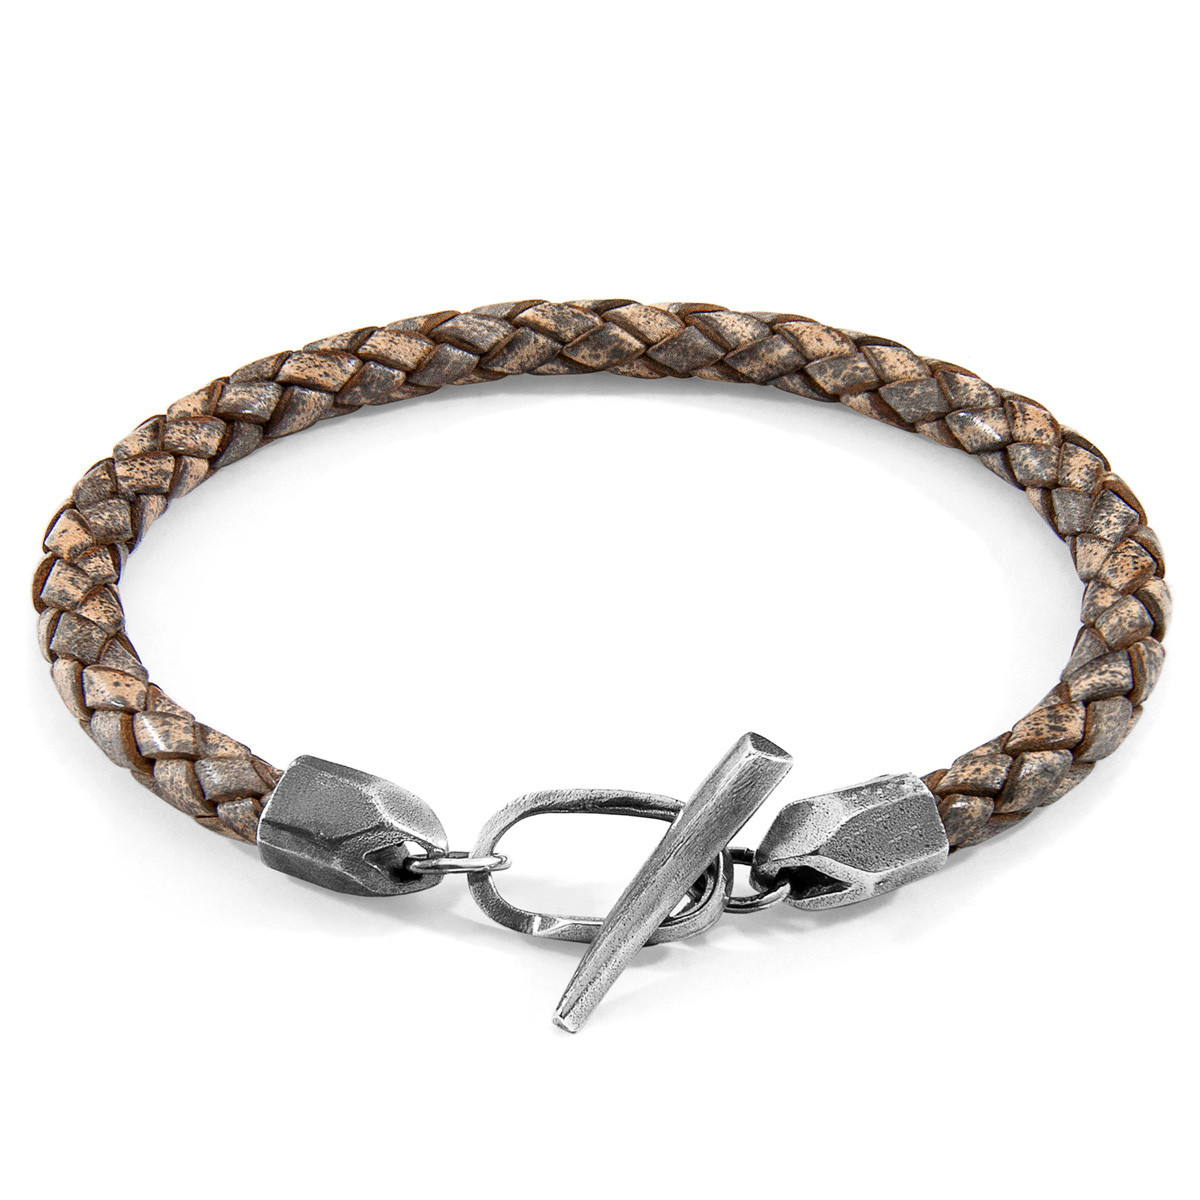 Anchor & Crew Taupe Grey Jura Silver and Braided Leather Bracelet